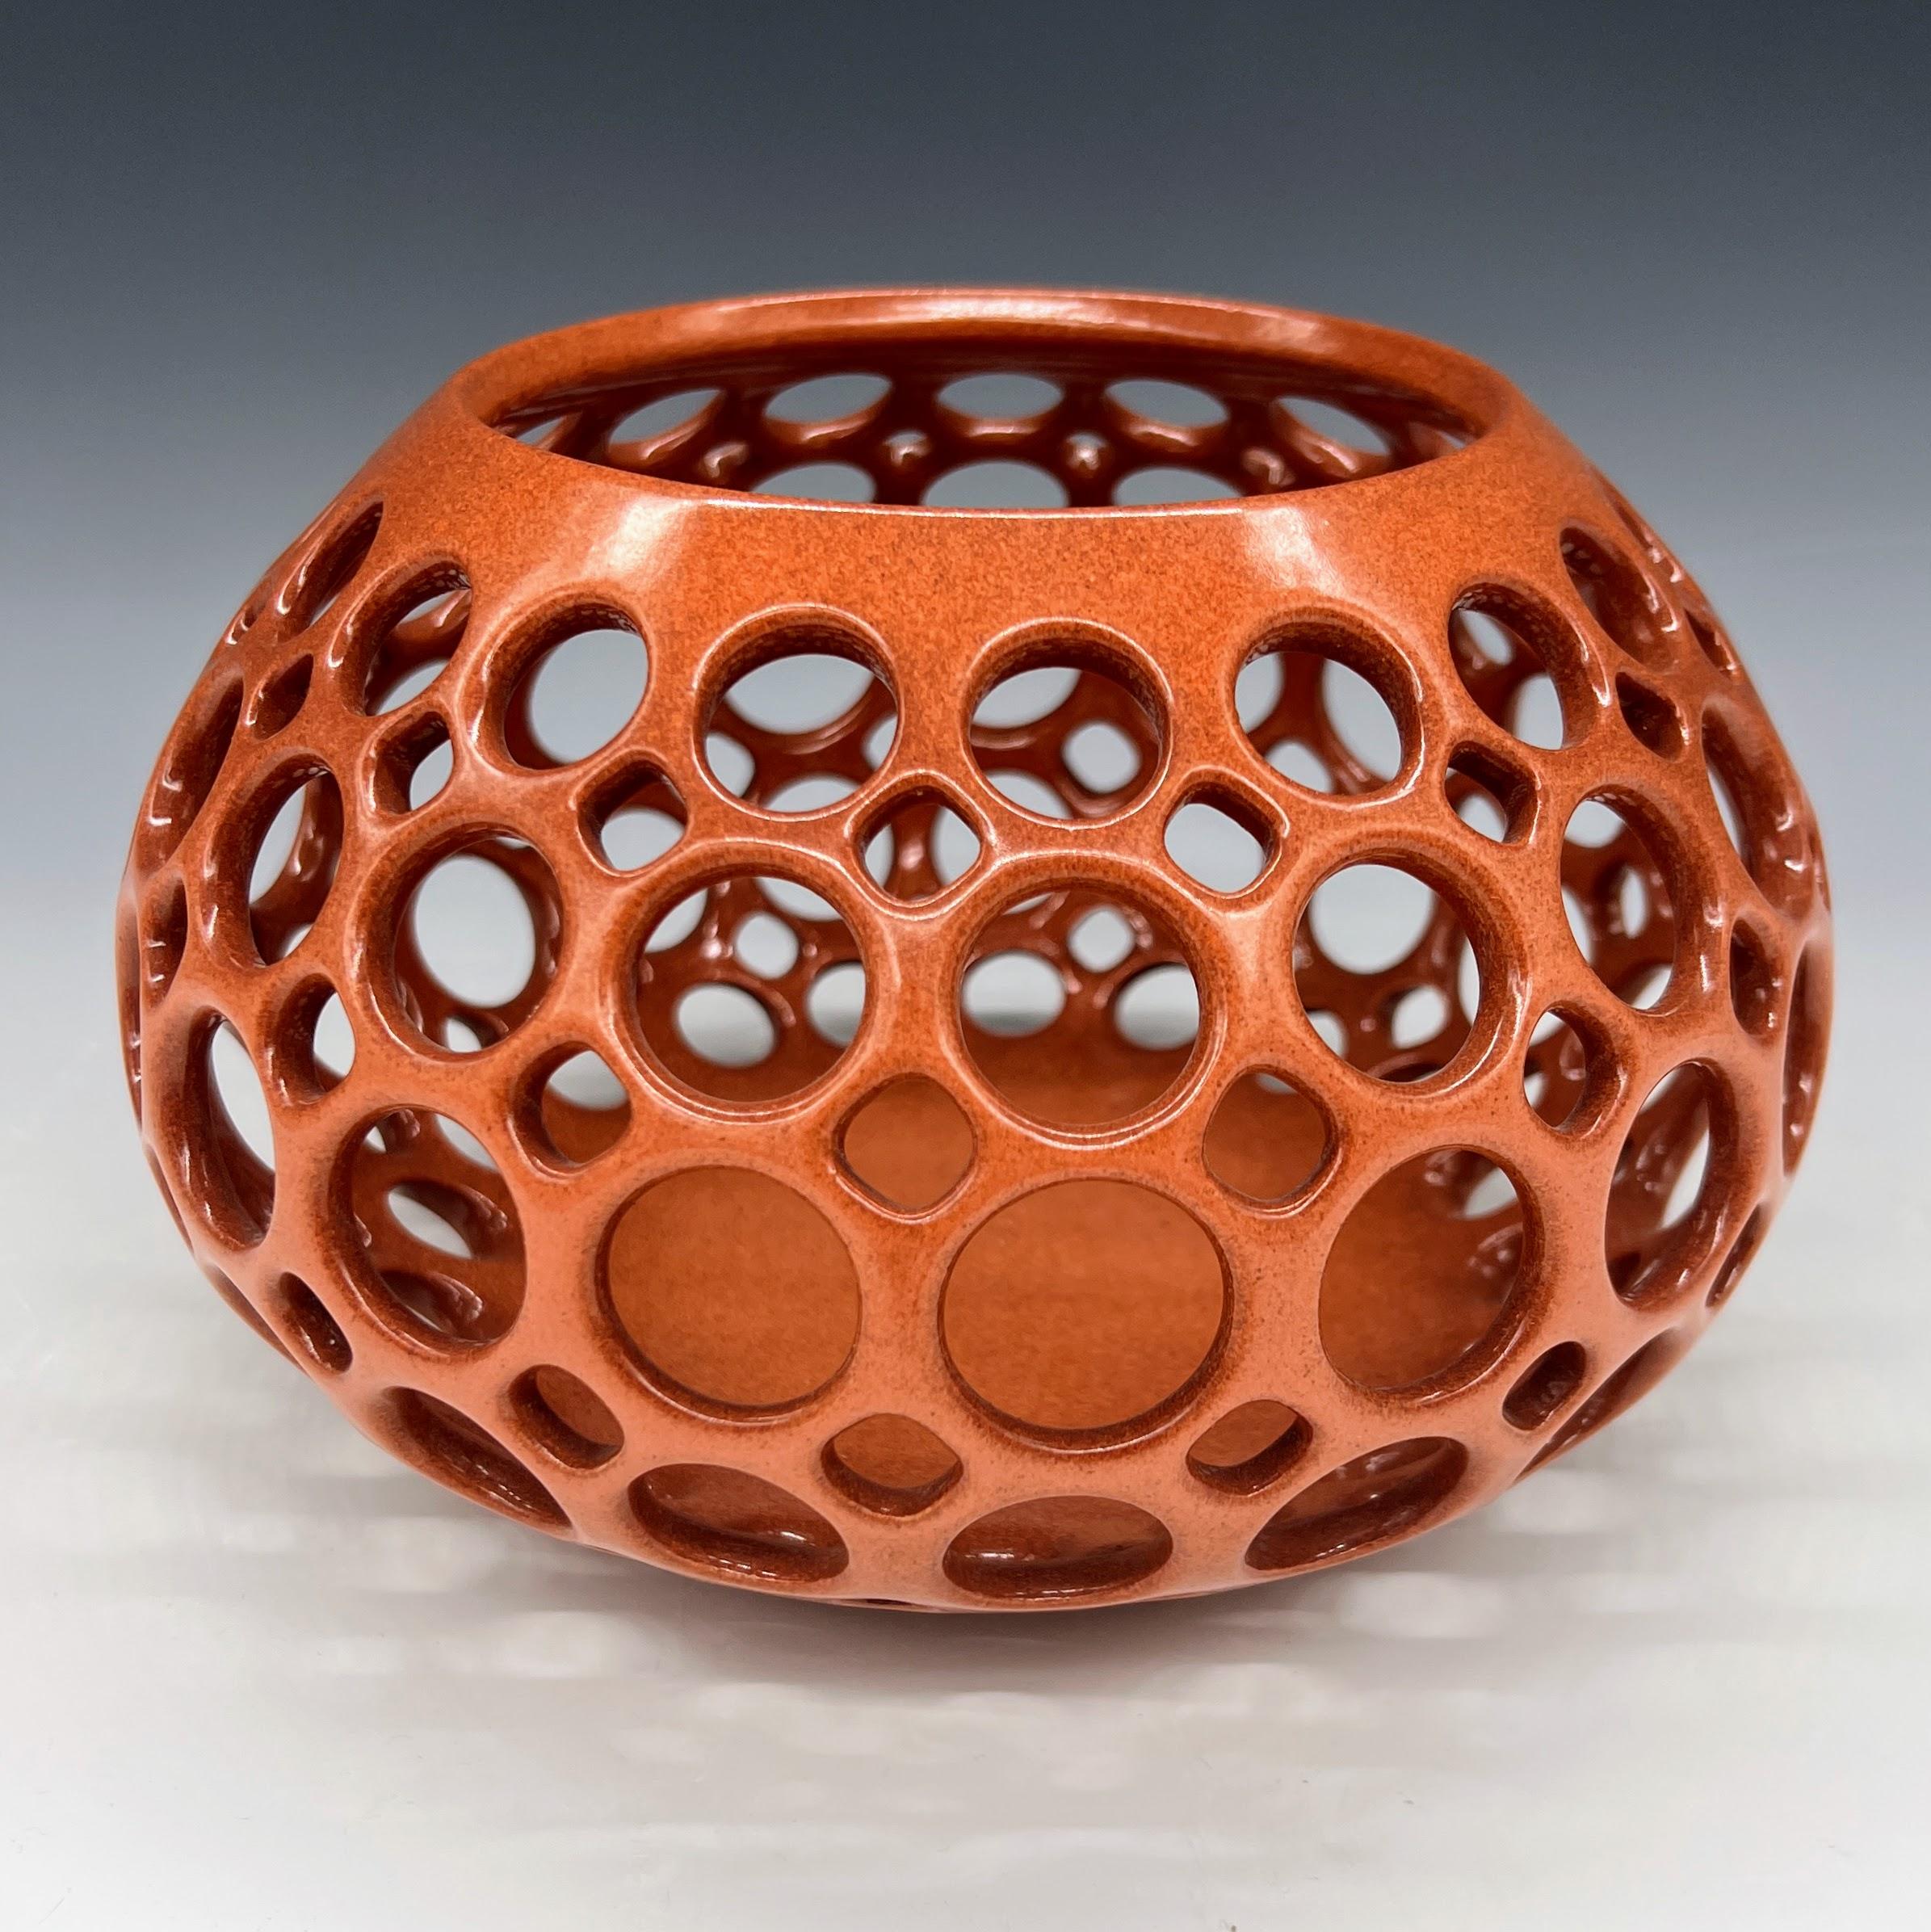 Inspired by Mid-Century Modern design, this piece is wheel thrown and hand pierced stoneware with a satin glaze. Small holes are created when the clay is still wet and then each hole is painstakingly enlarged and smoothed when the clay is bone dry.